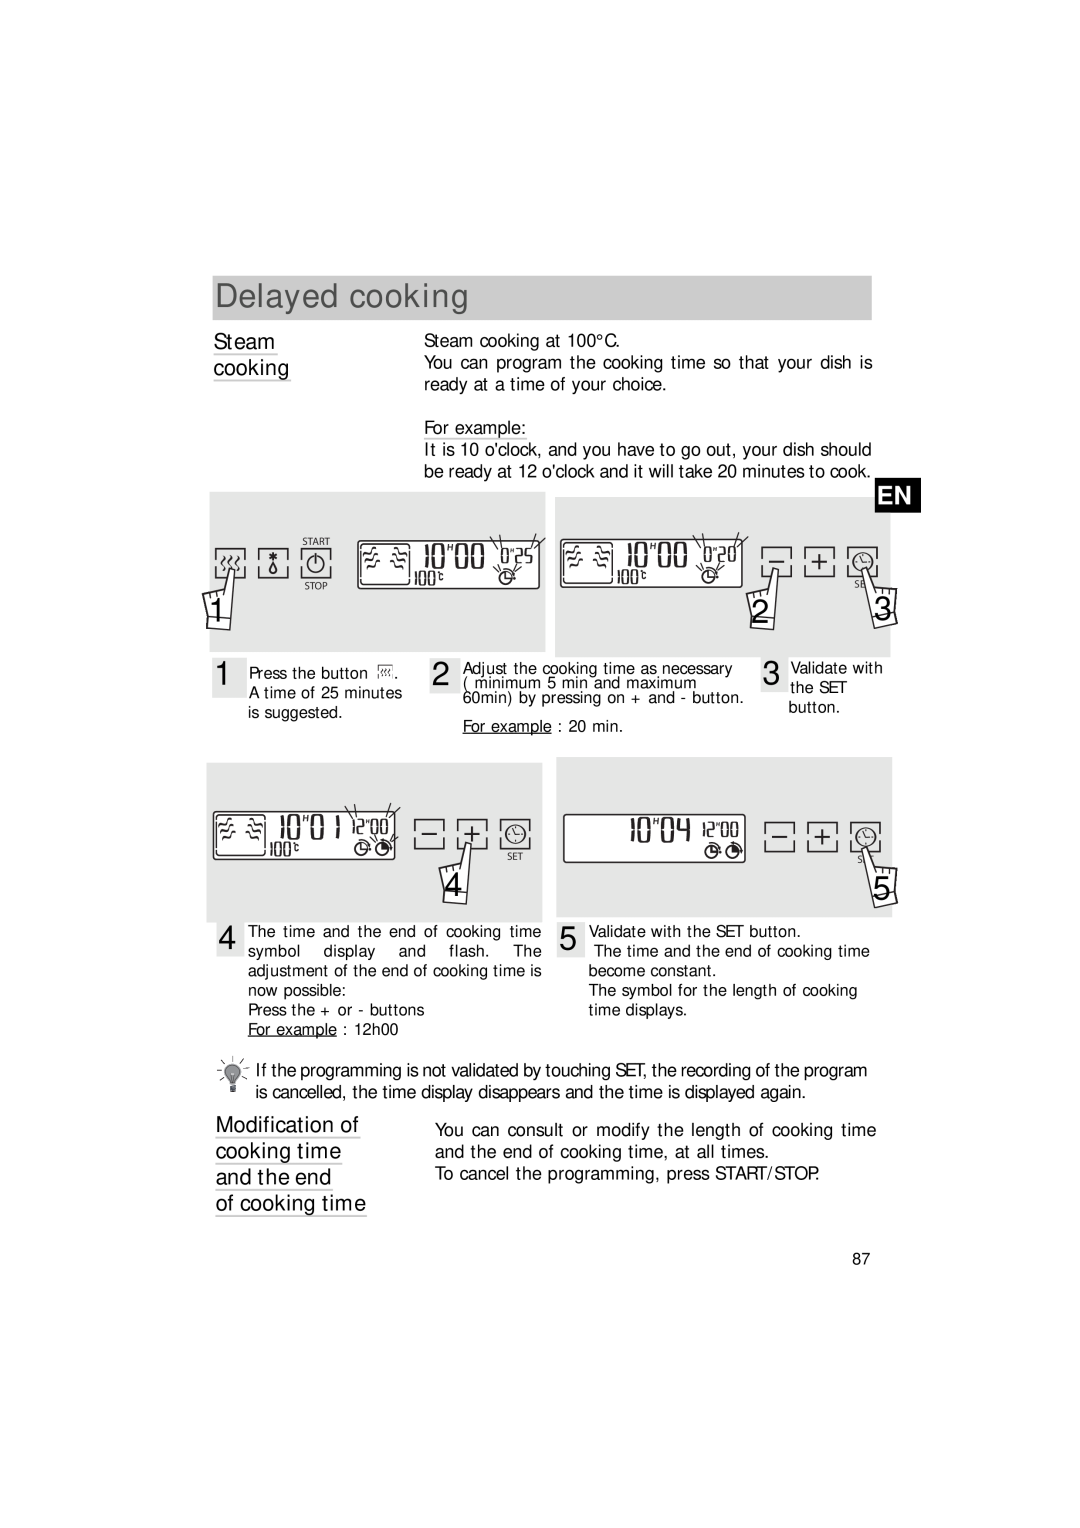 Hotpoint SEO100 manual Delayed cooking, Steam cooking 